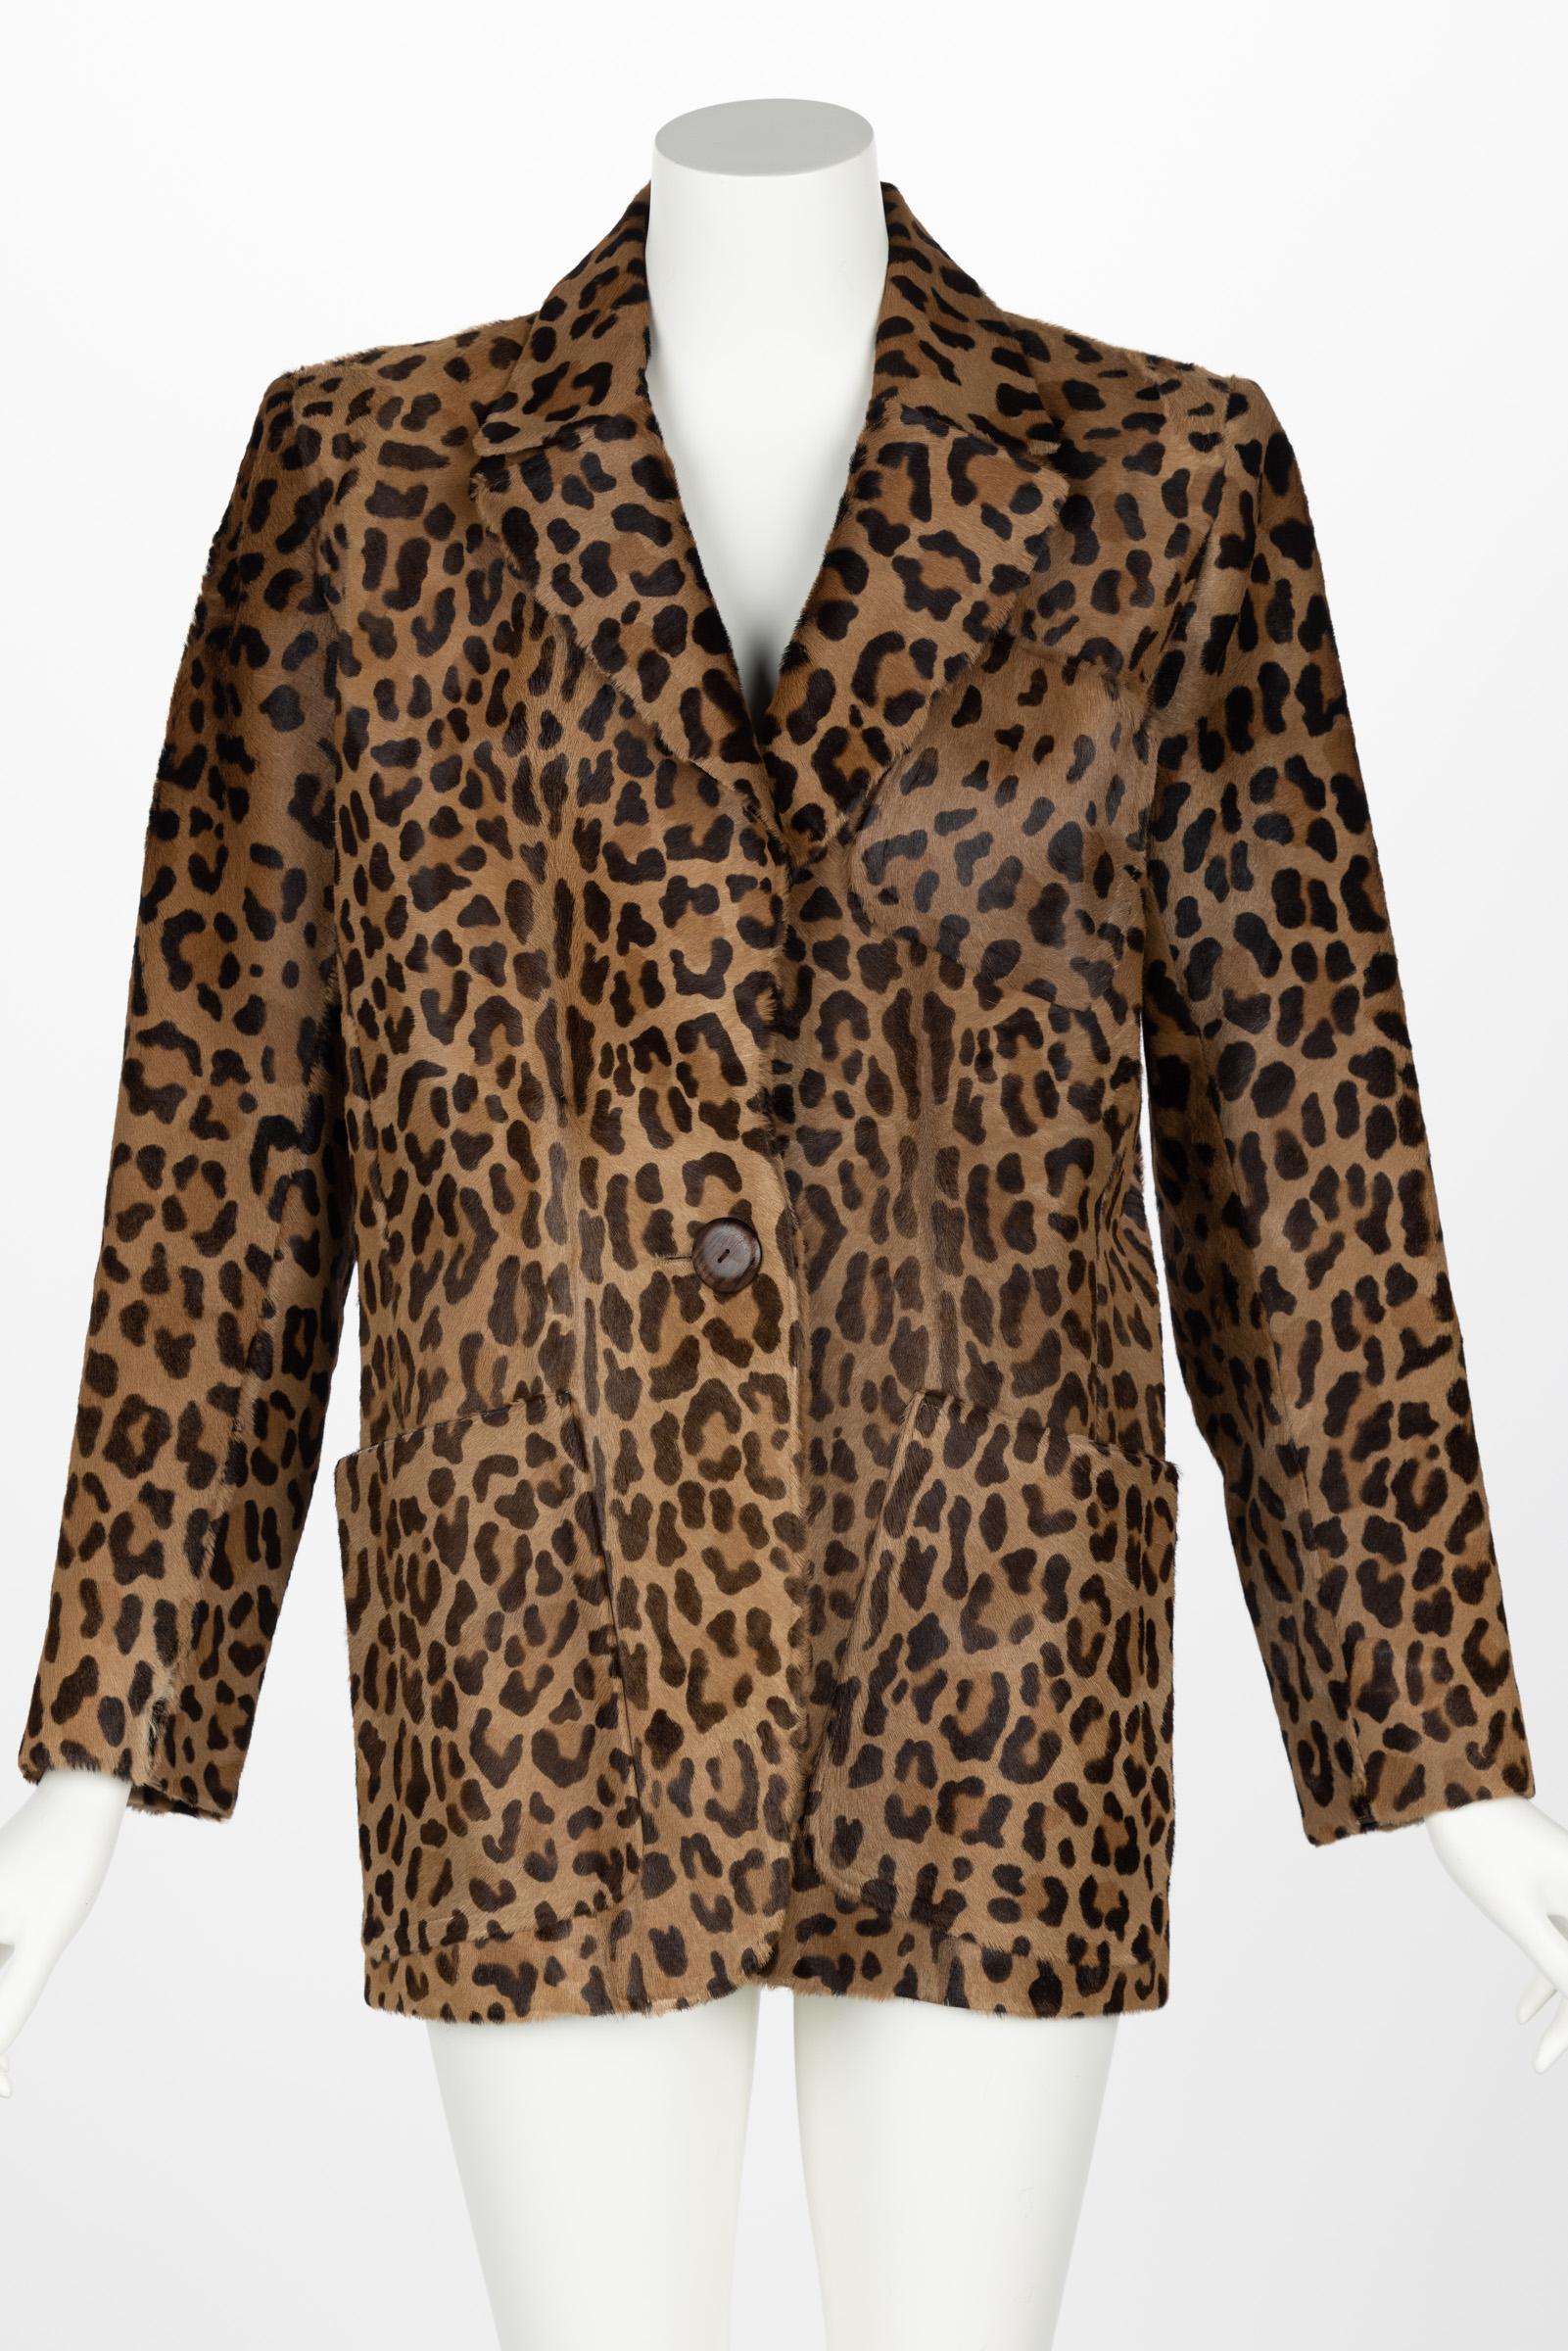  
A fashion superstar, Yves Saint Laurent was no stranger to prints and frequently incorporated them into his collections. Leopard is a staple of the YSL wardrobe, and is a print that was especially popular during the 80s and 90s. Though celebrated